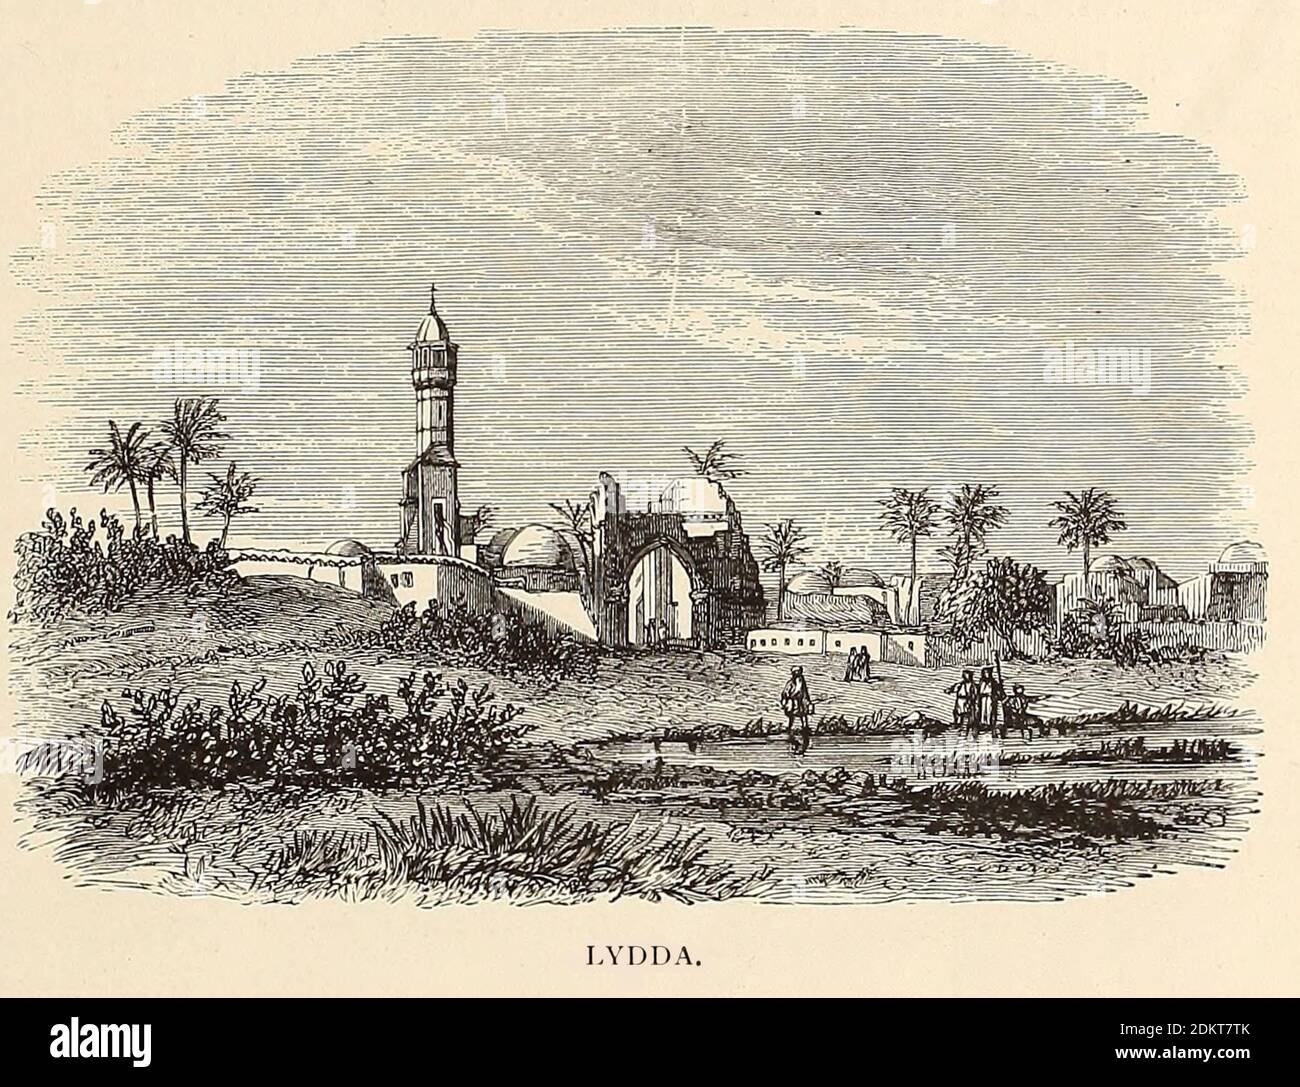 Lydda [Lod] From the book 'Those holy fields : Palestine, illustrated by pen and pencil' by Manning, Samuel, 1822-1881; Religious Tract Society (Great Britain) Published in 1873 Stock Photo